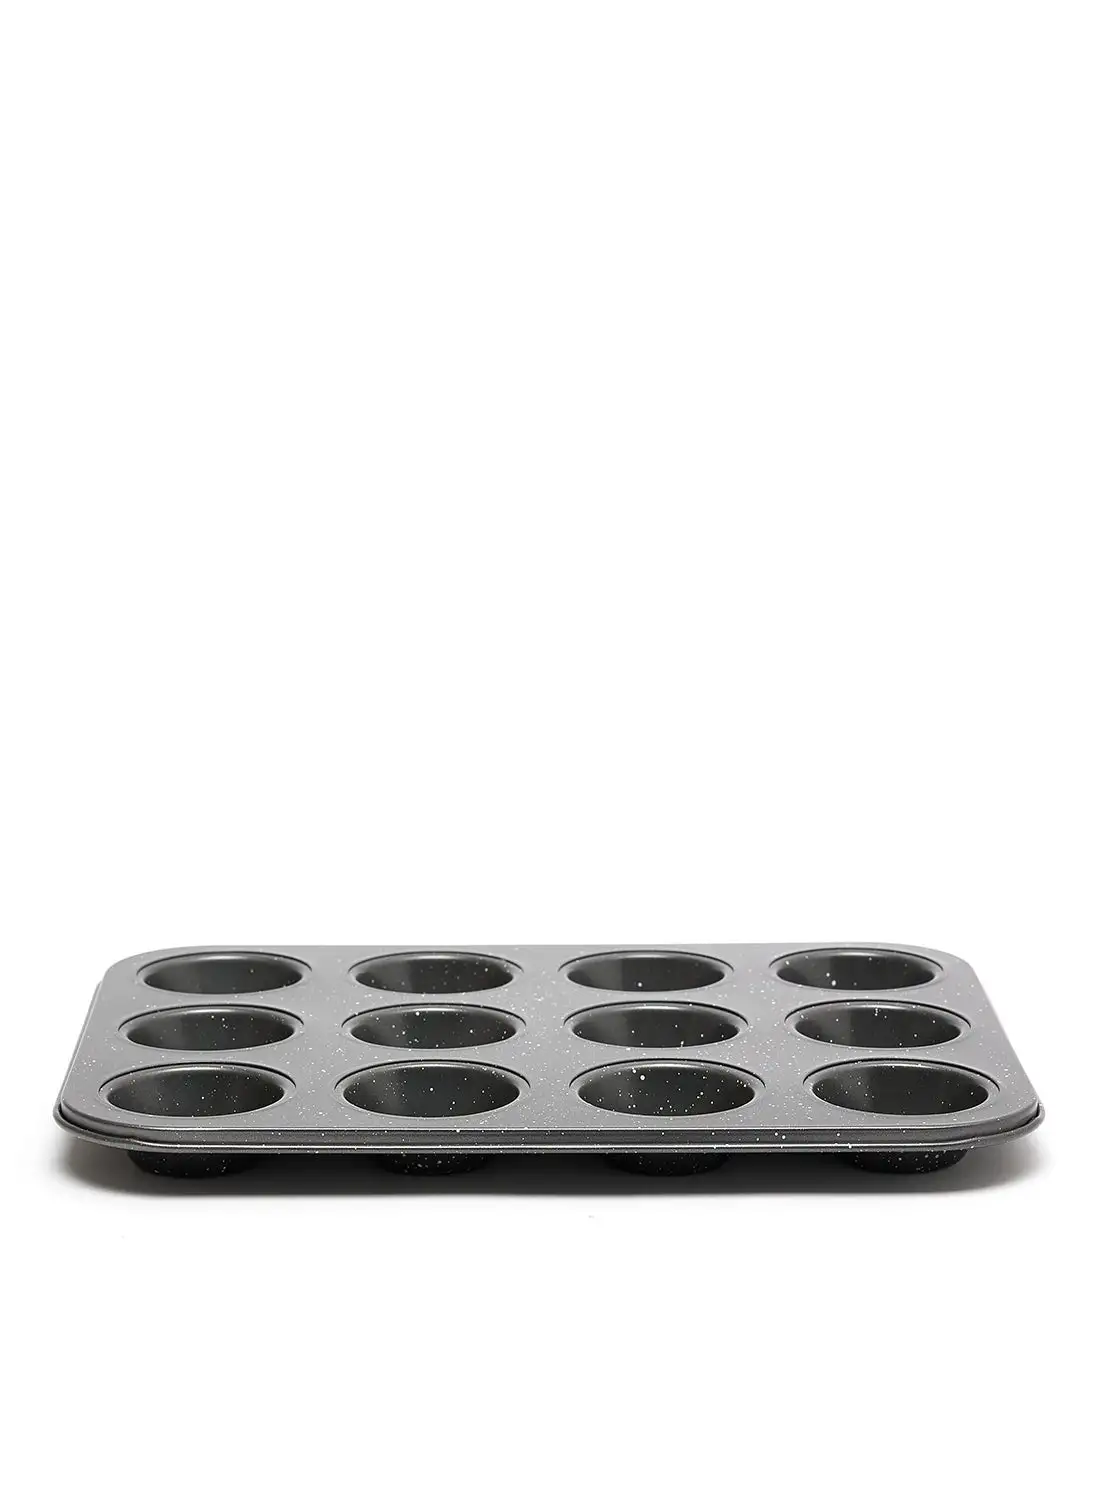 noon east Oven Pan - Made Of Carbon Steel - Muffin Tray - Baking Pan - Oven Trays - Cake Tray - Oven Pan - Granite Dark Grey